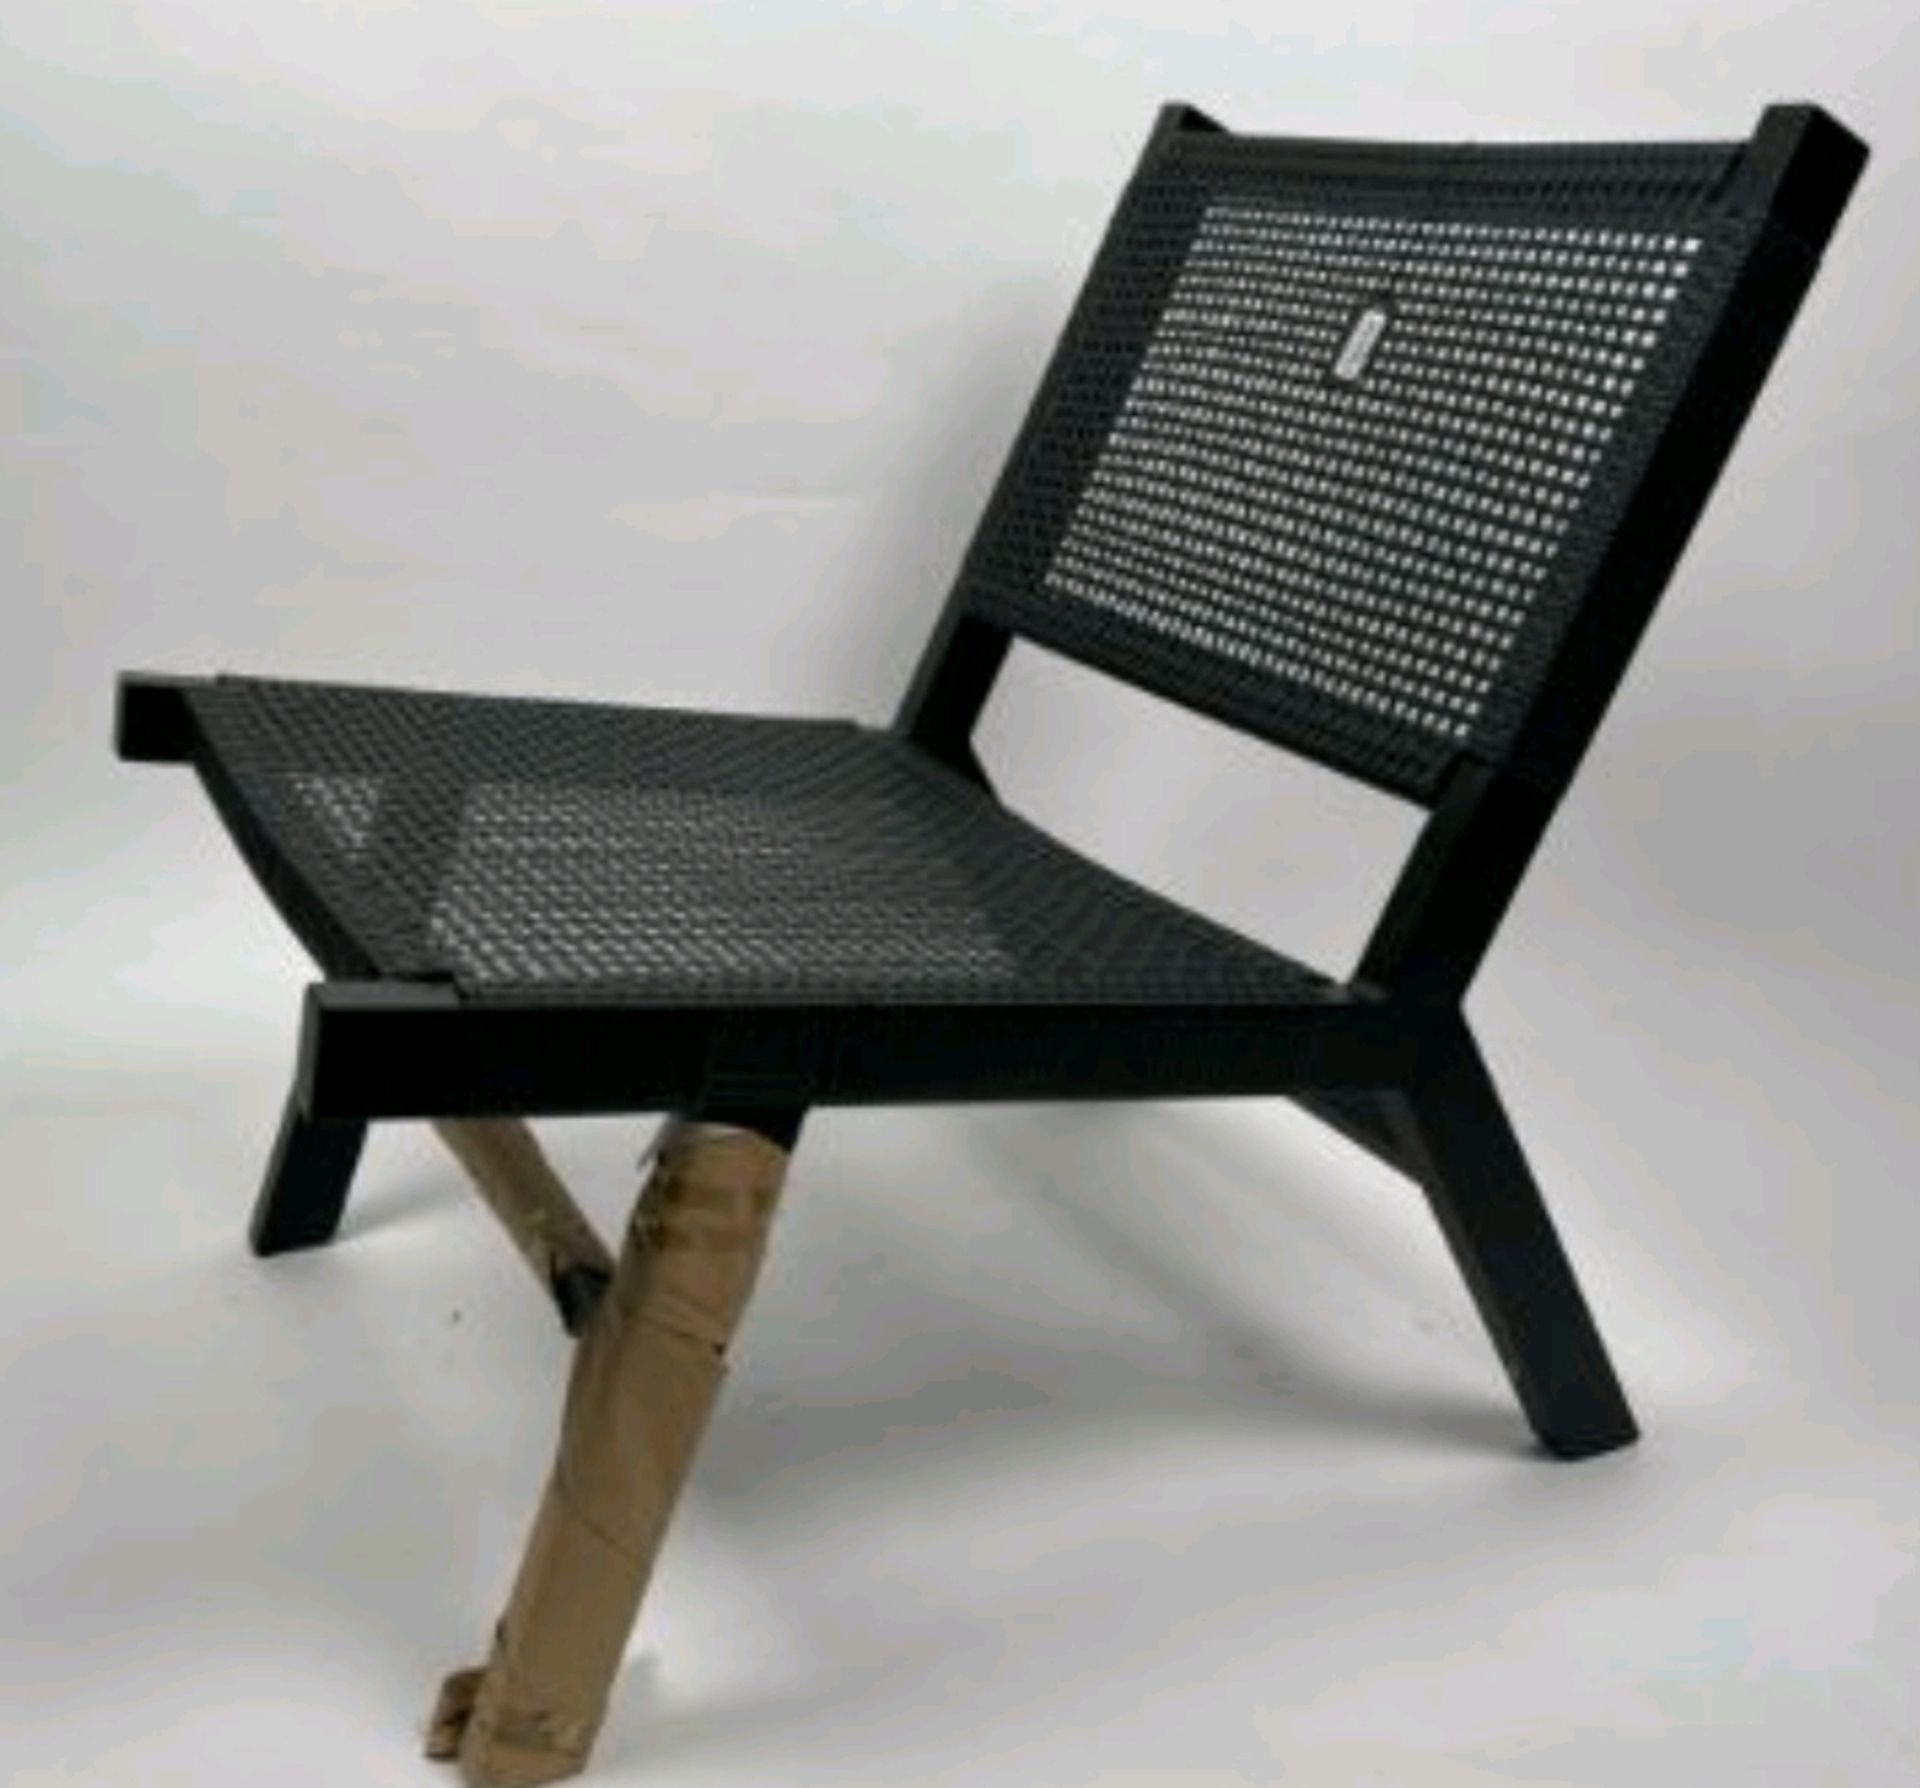 Nordal Vasei Lounge Chair - Image 3 of 4